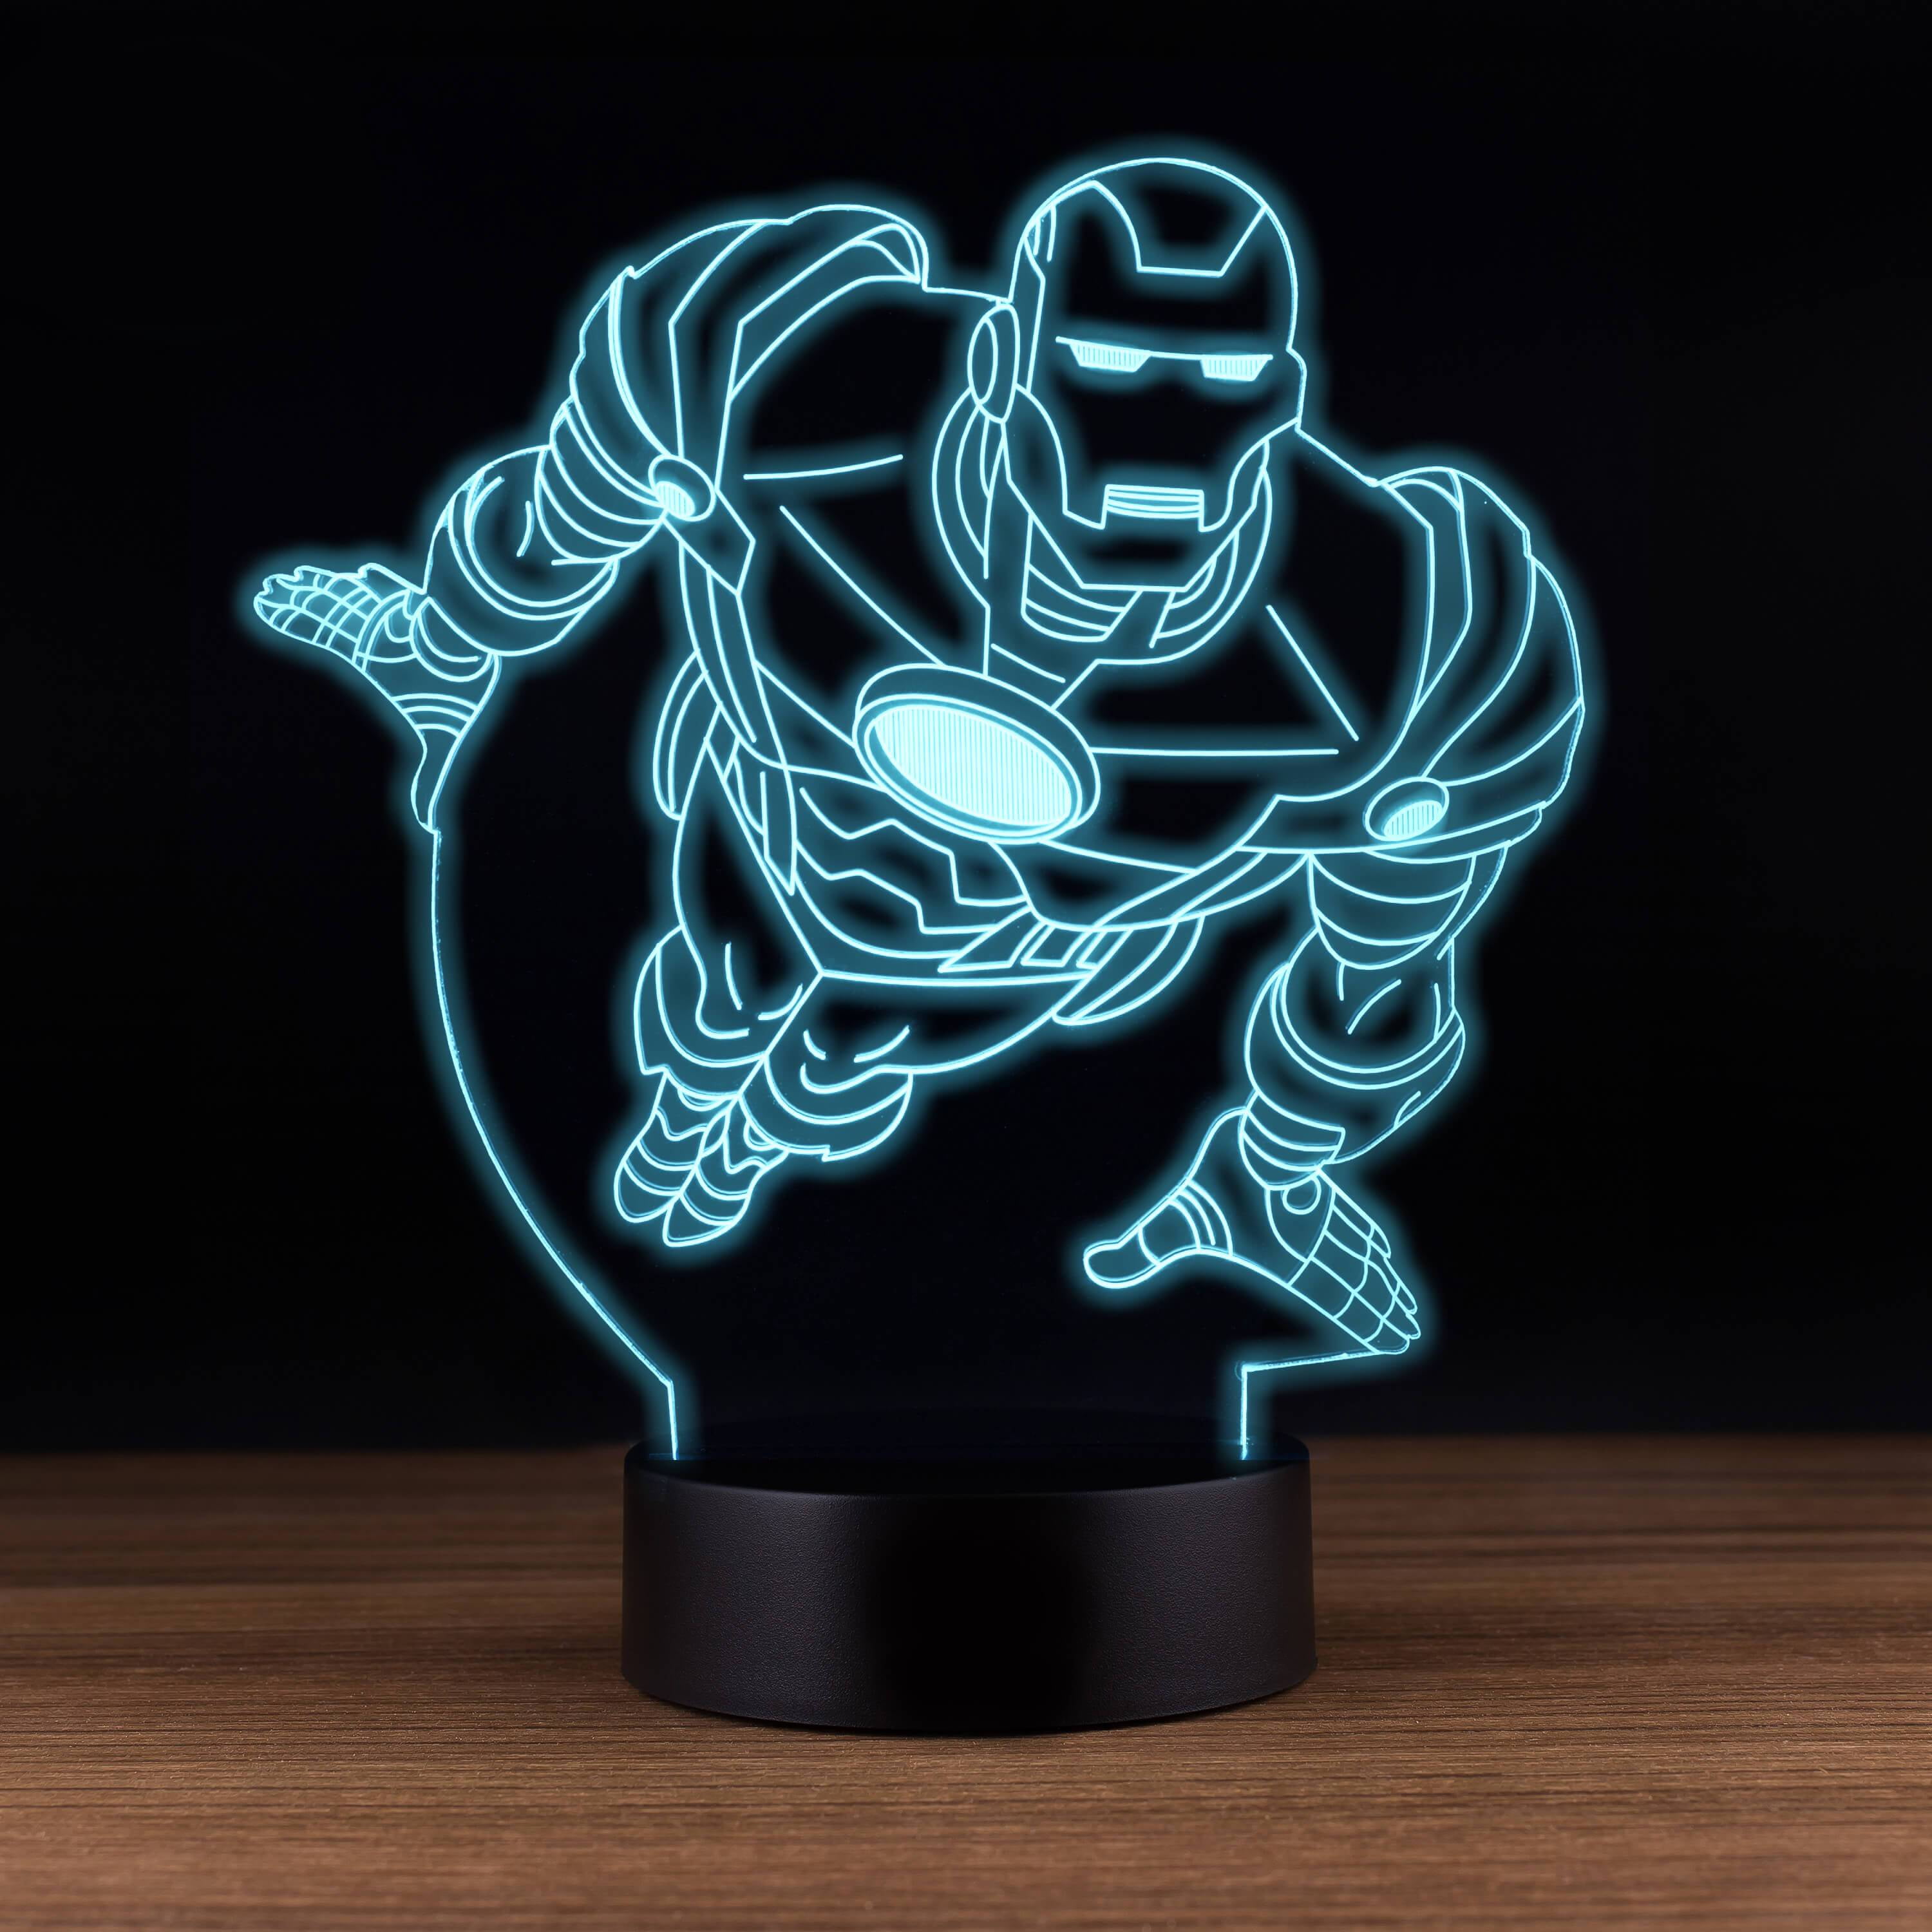 3D LED LIGHT SUPERMAN 7 COLOR CHANGE REMOTE CONTROL GIFT NIGHT LIGHT ACRYLIC 